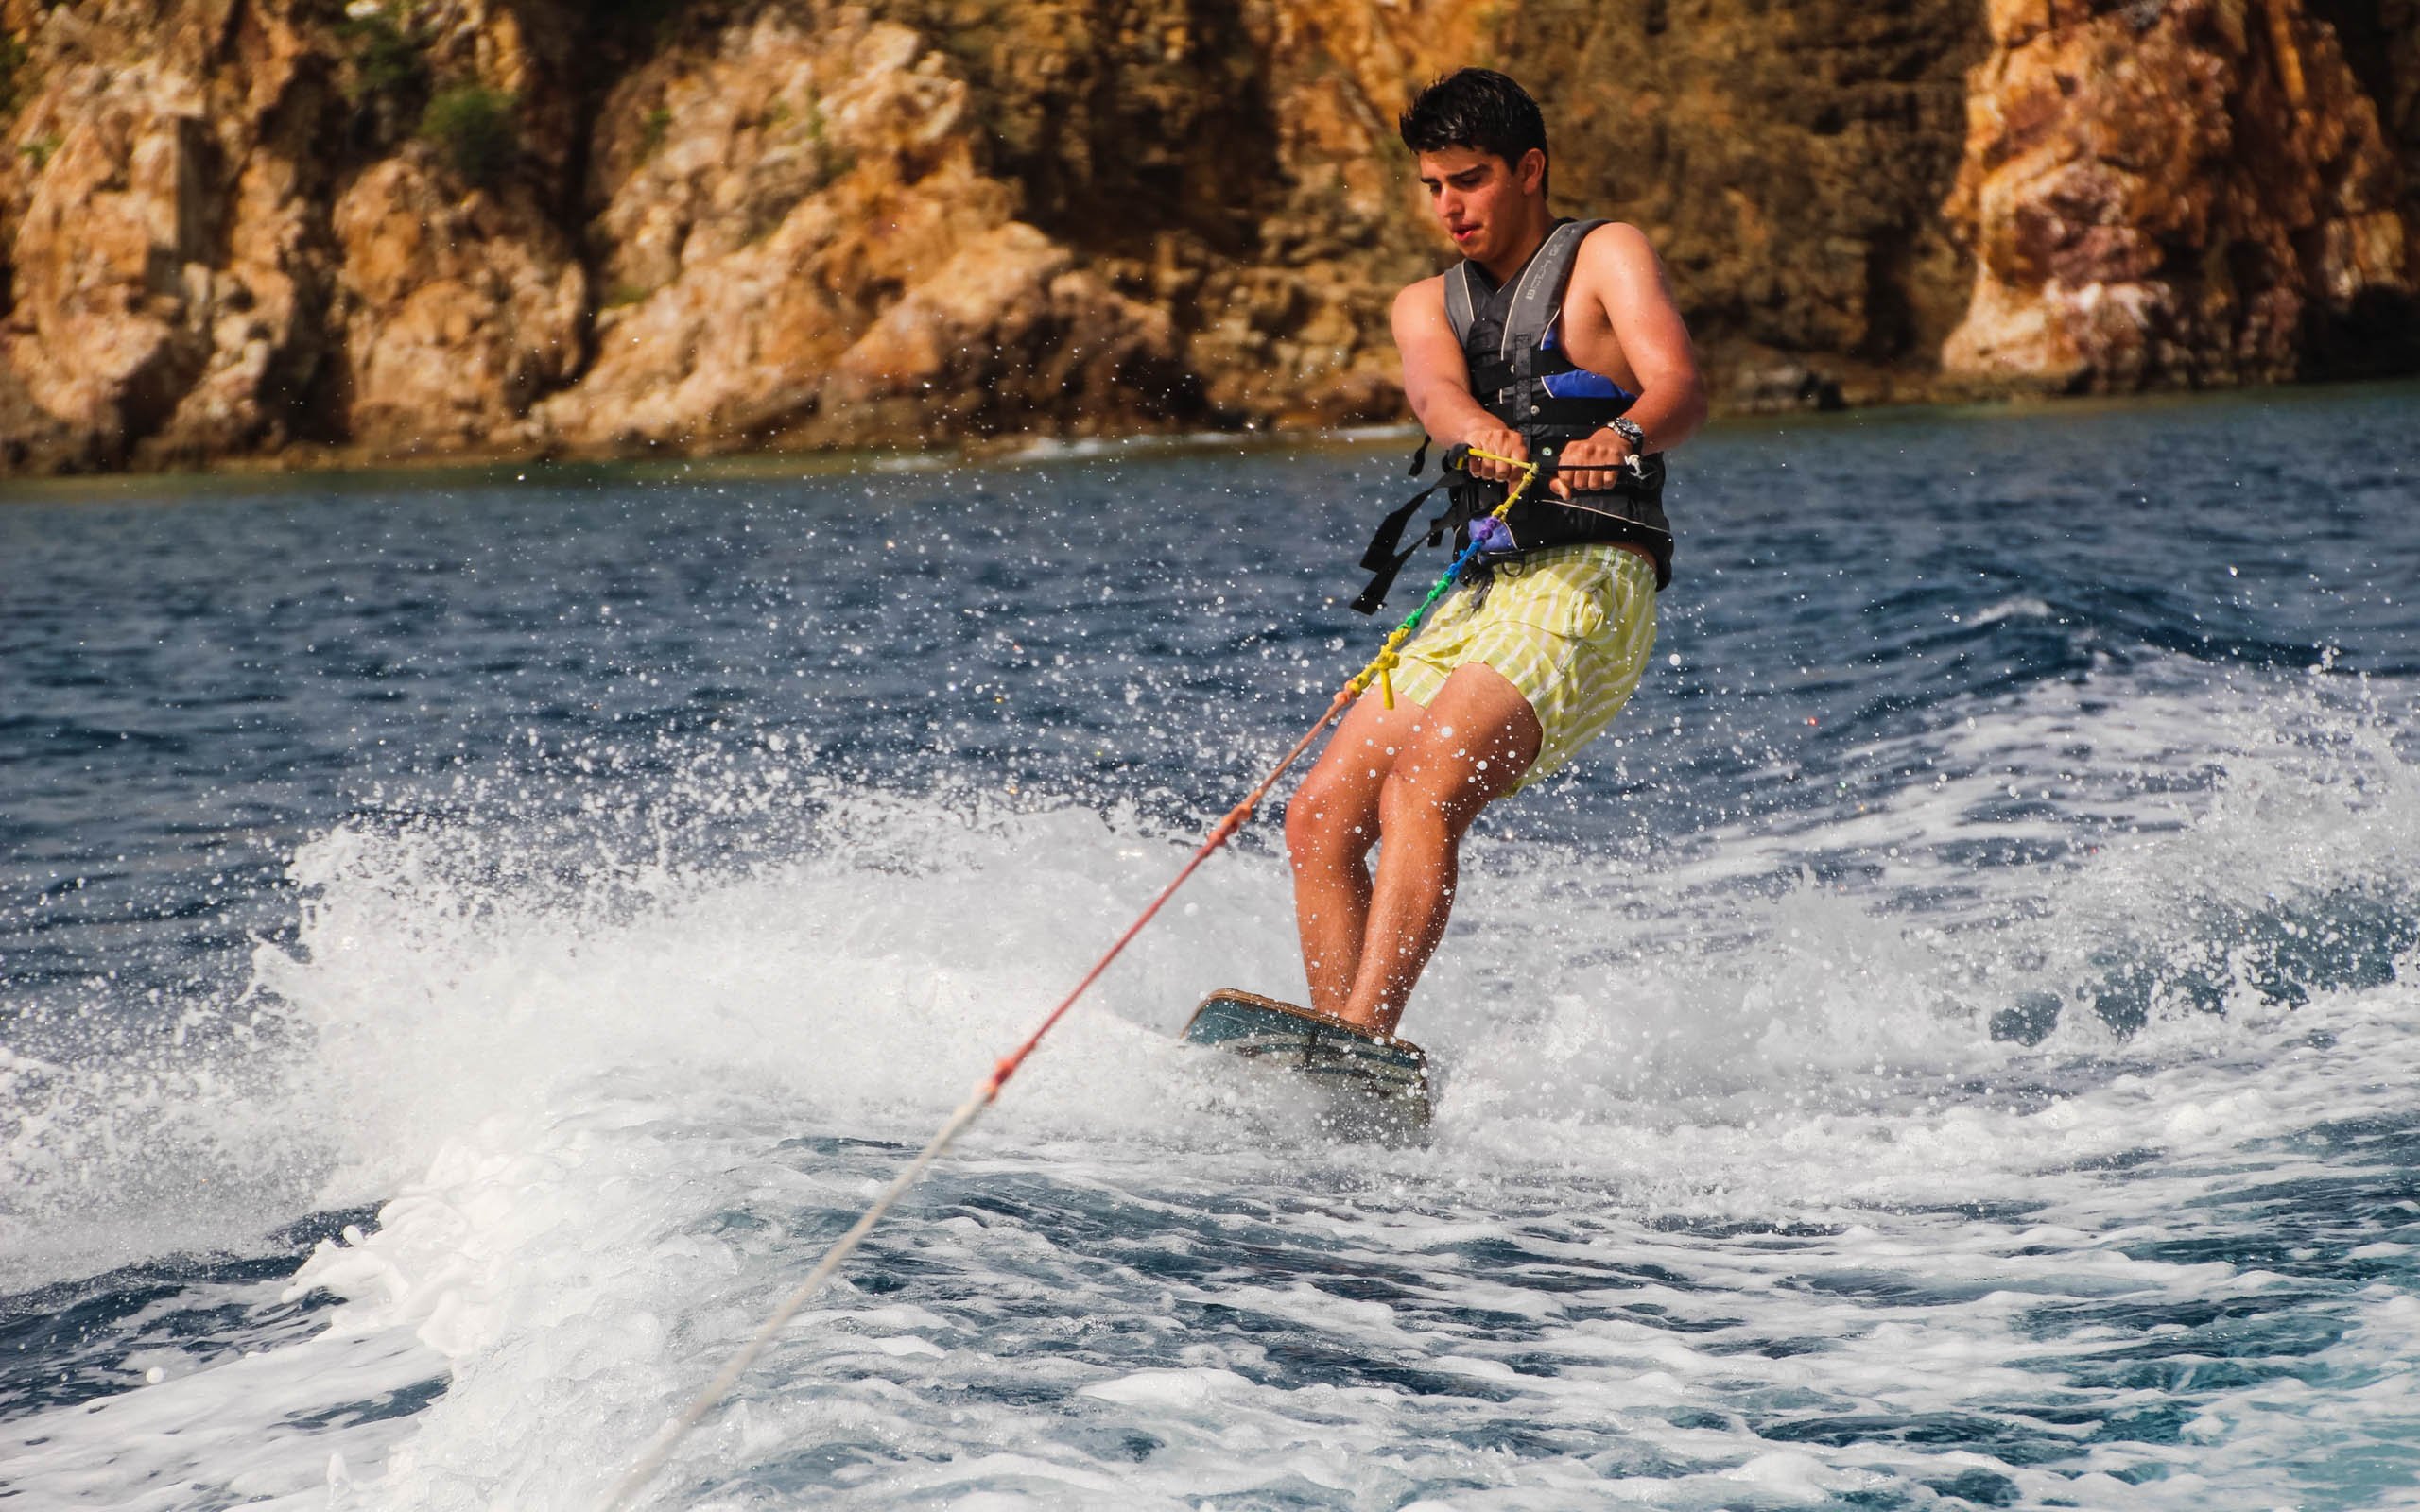 A man is riding a water ski in the water.